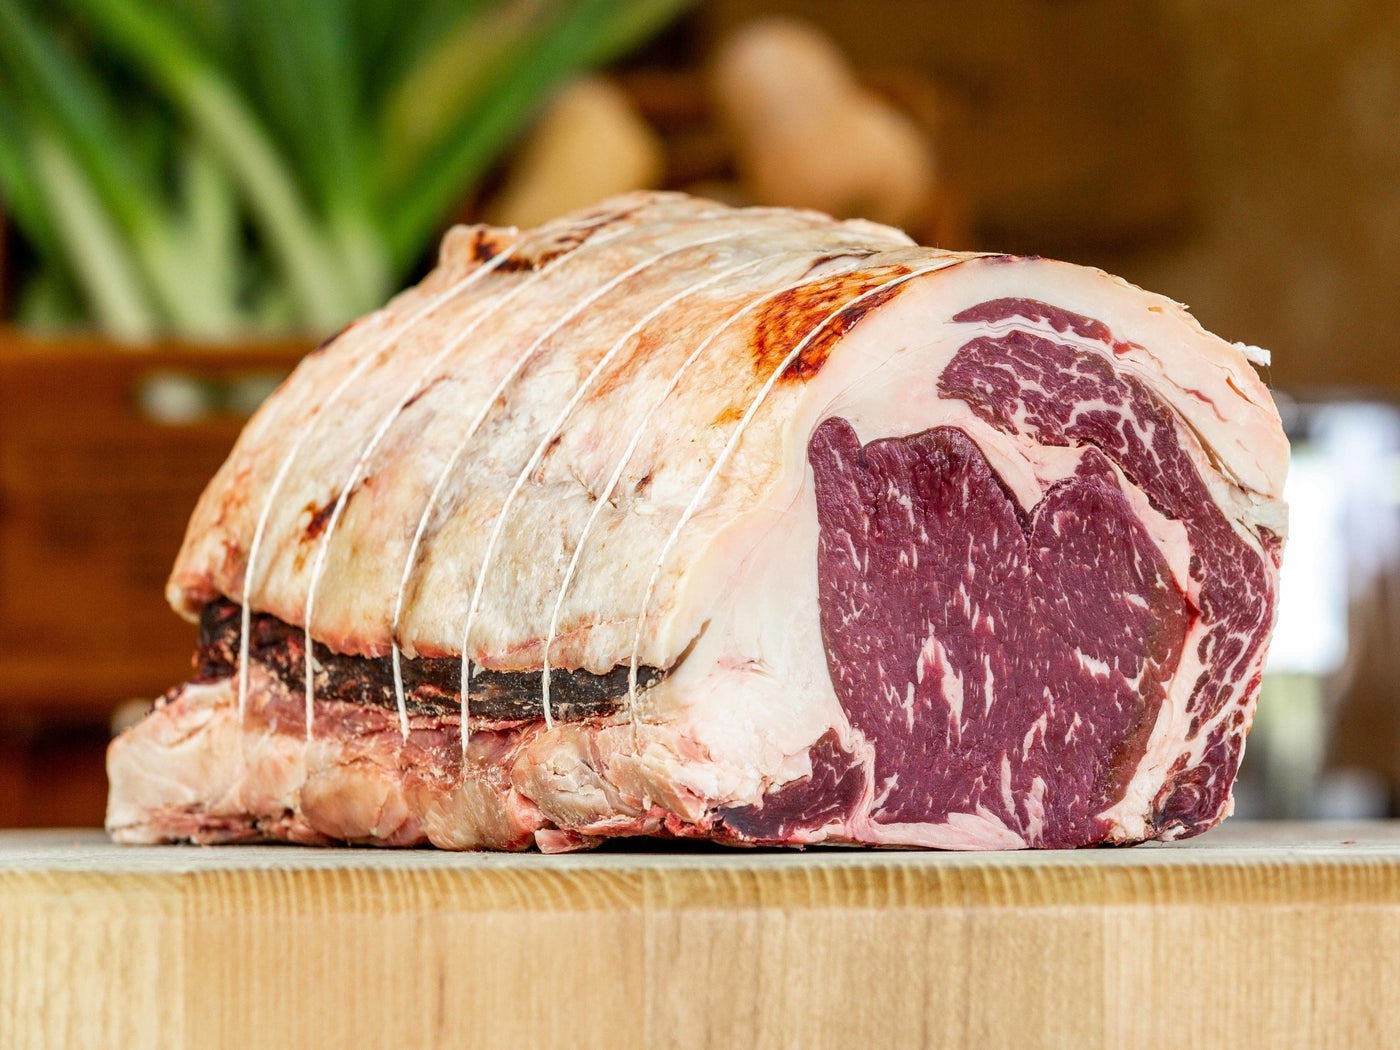 Grass Fed, Dry-Aged Boneless Rolled Rib Of Beef Box, With All The Trimmings - Thomas Joseph Butchery - Ethical Dry-Aged Meat The Best Steak UK Thomas Joseph Butchery